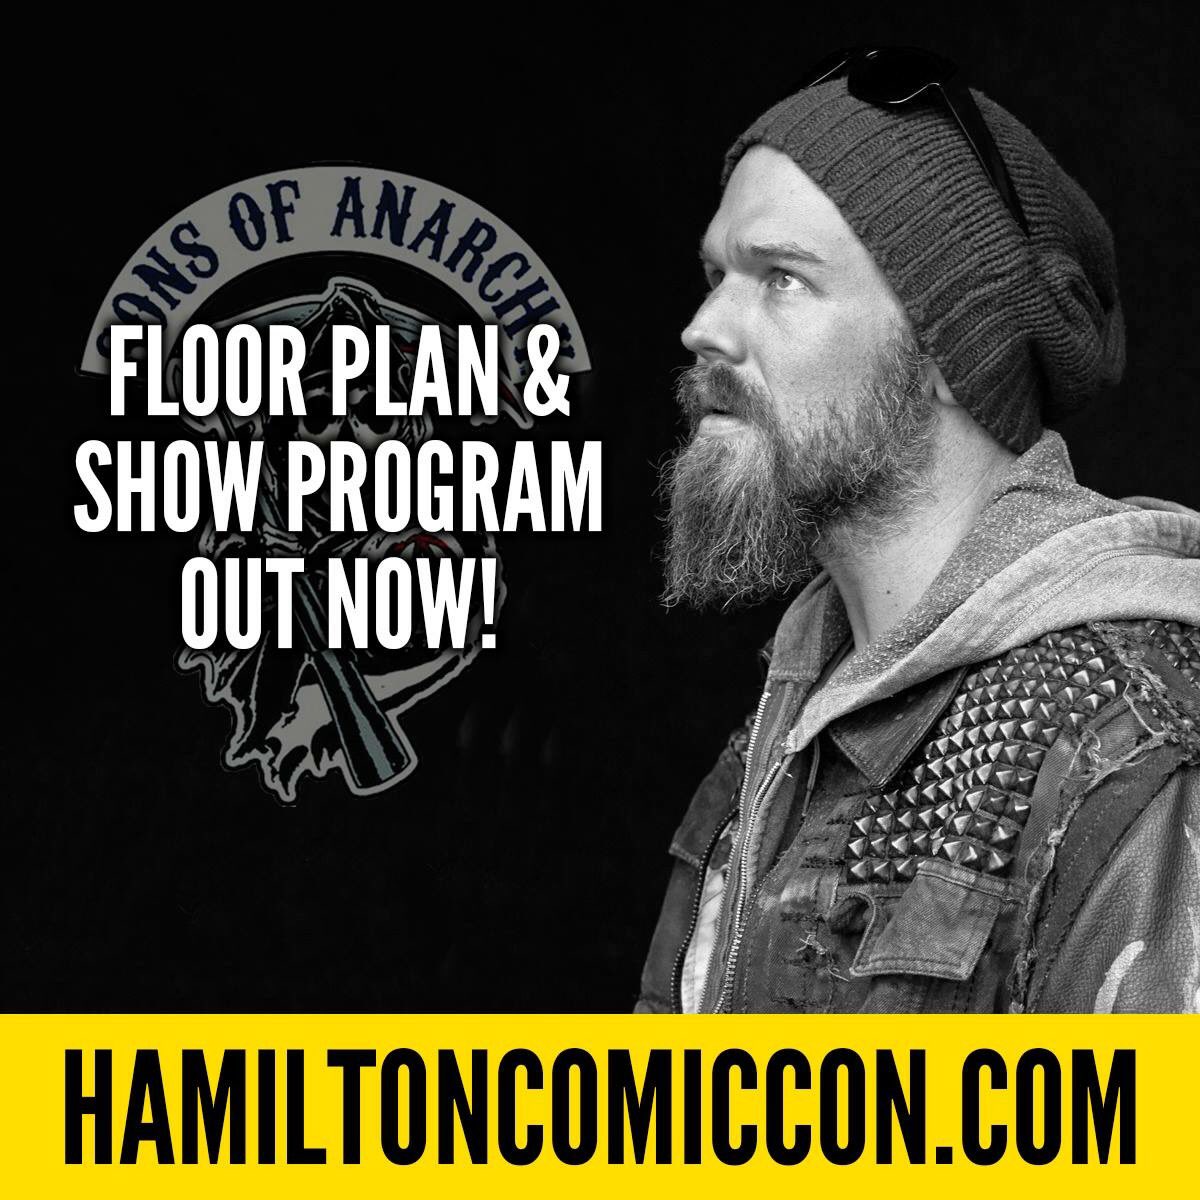 Hamiltoncomiccon On Twitter The Floor Plan Program Pricing And